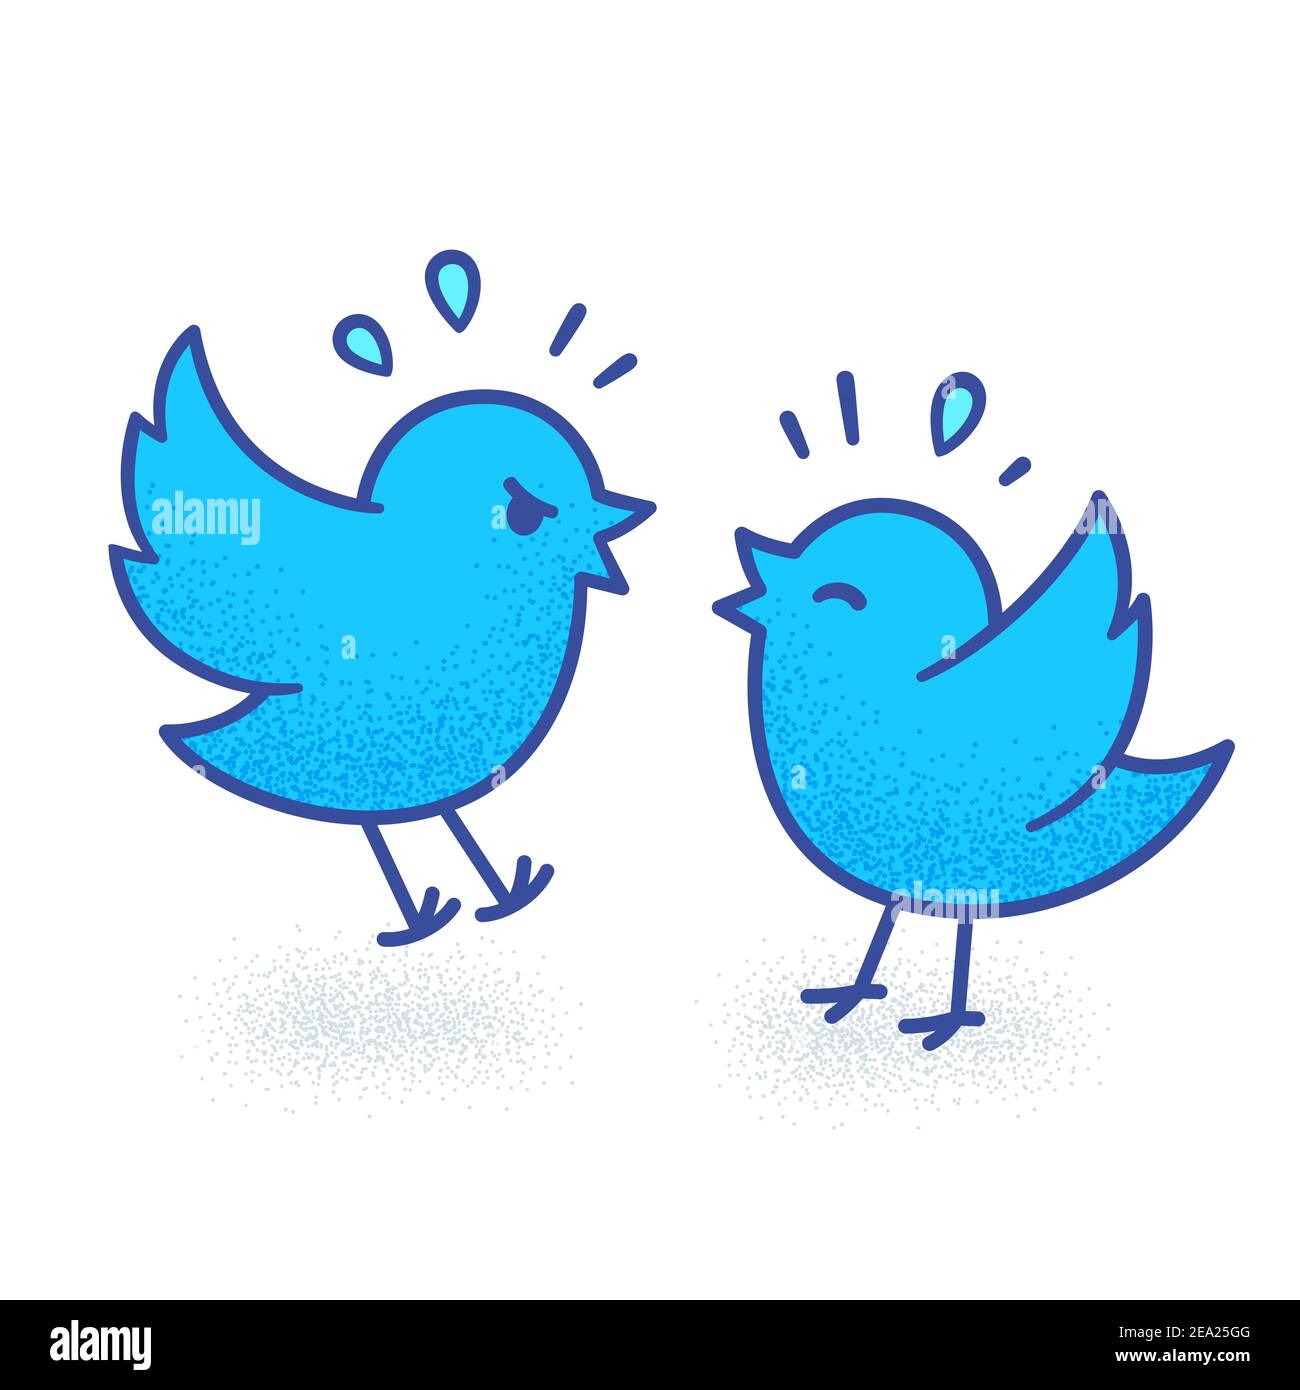 January 30, 2021. Illustration of two cartoon Twitter birds fighting, arguing on social media. Cute funny vector drawing. Stock Vector